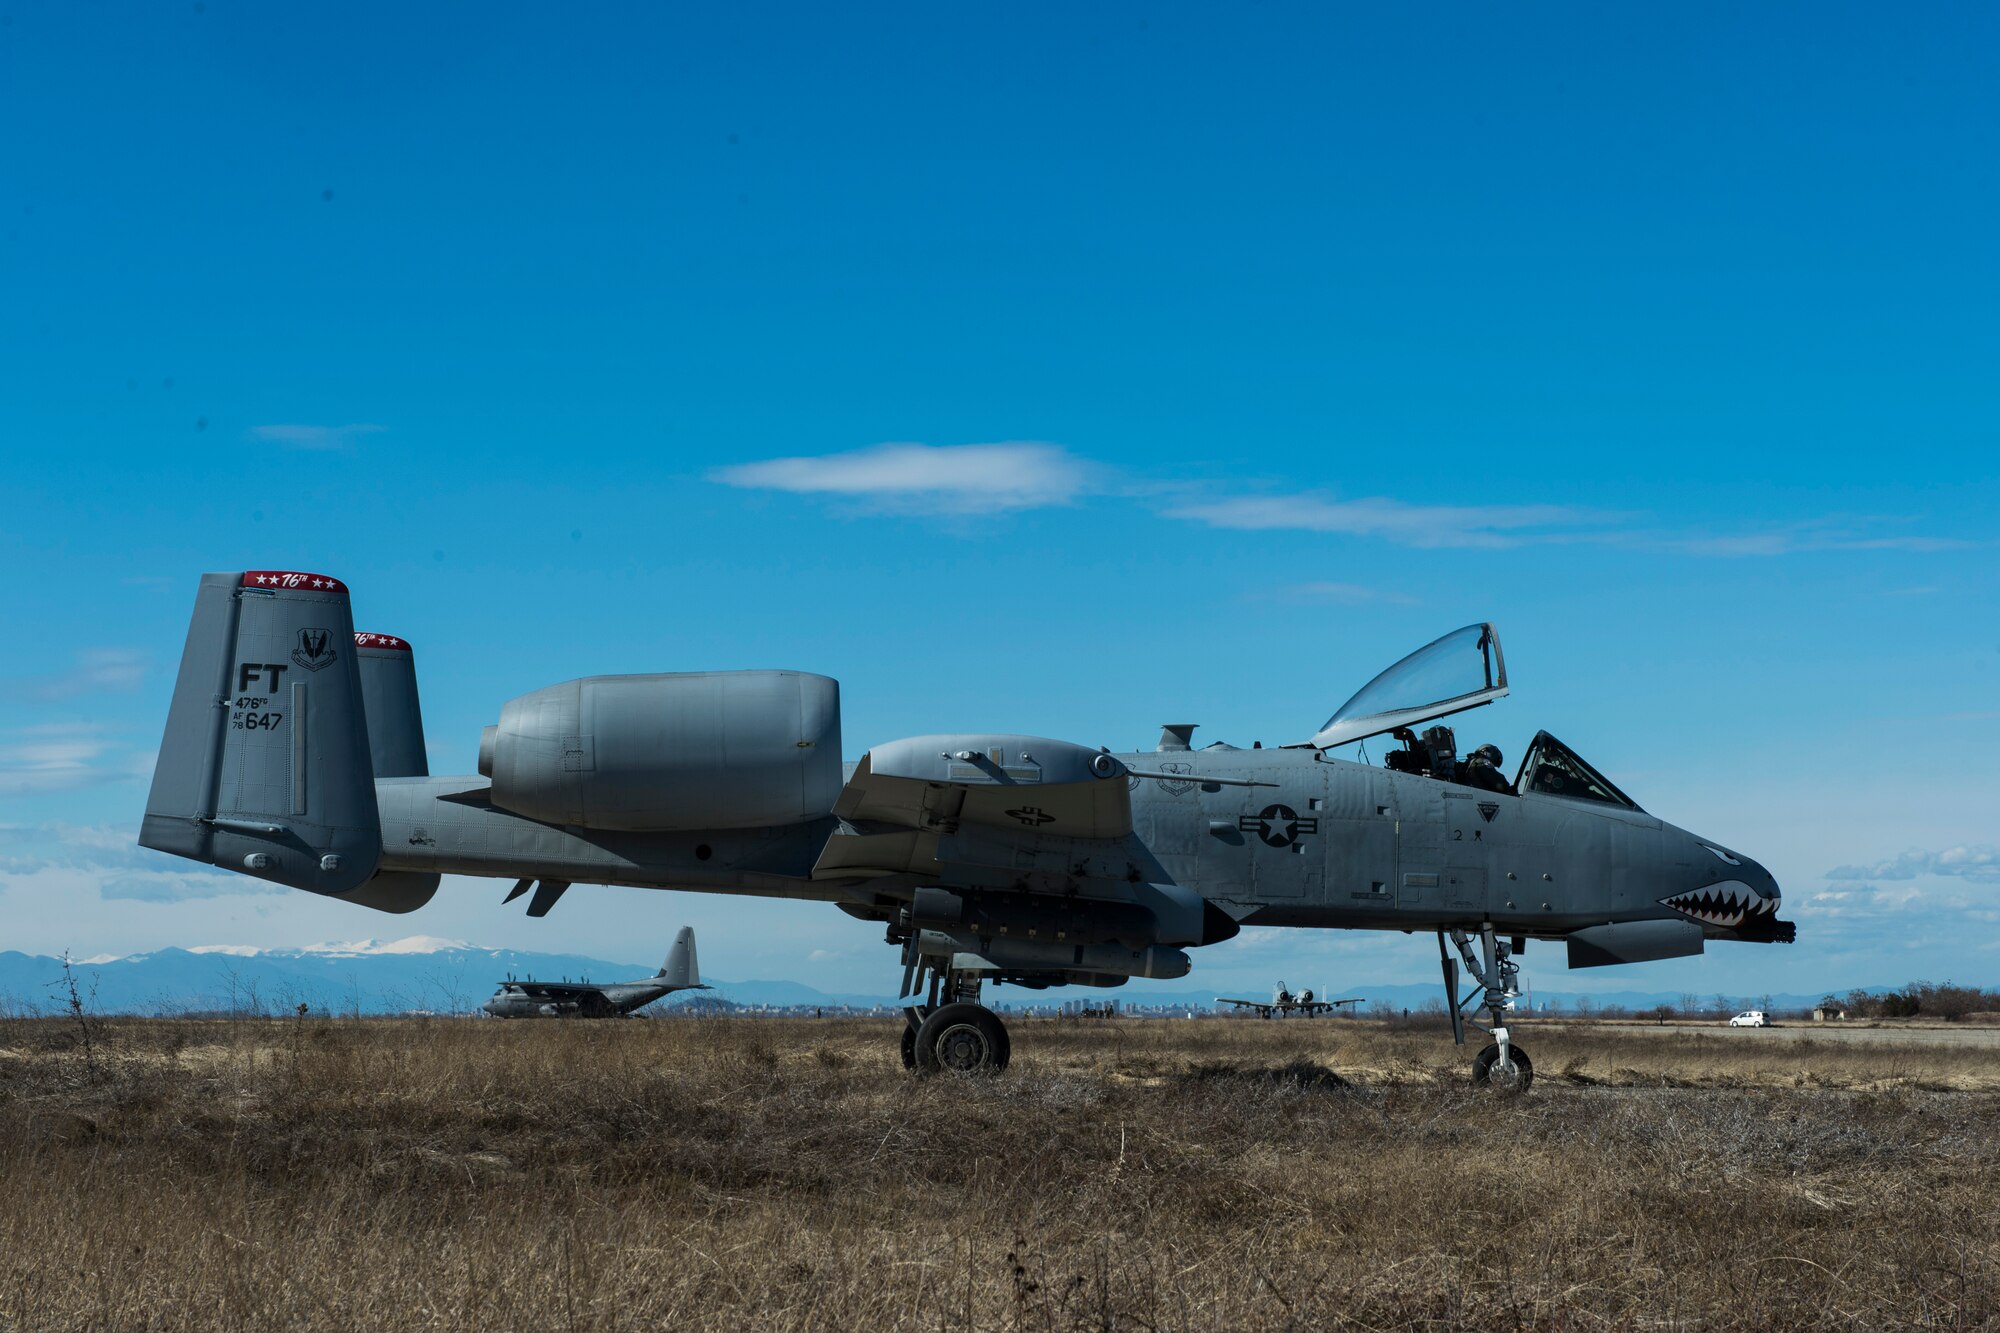 A 74th Expeditionary Fighter Squadron A-10C Thunderbolt II aircraft pilot waits to have his aircraft refueled during forward area refueling point training at Plovdiv, Bulgaria, Feb. 9, 2016. FARP capabilities allow one aircraft to refuel other aircraft in remote locations. (U.S. Air Force photo by Airman 1st Class Luke Kitterman/Released)